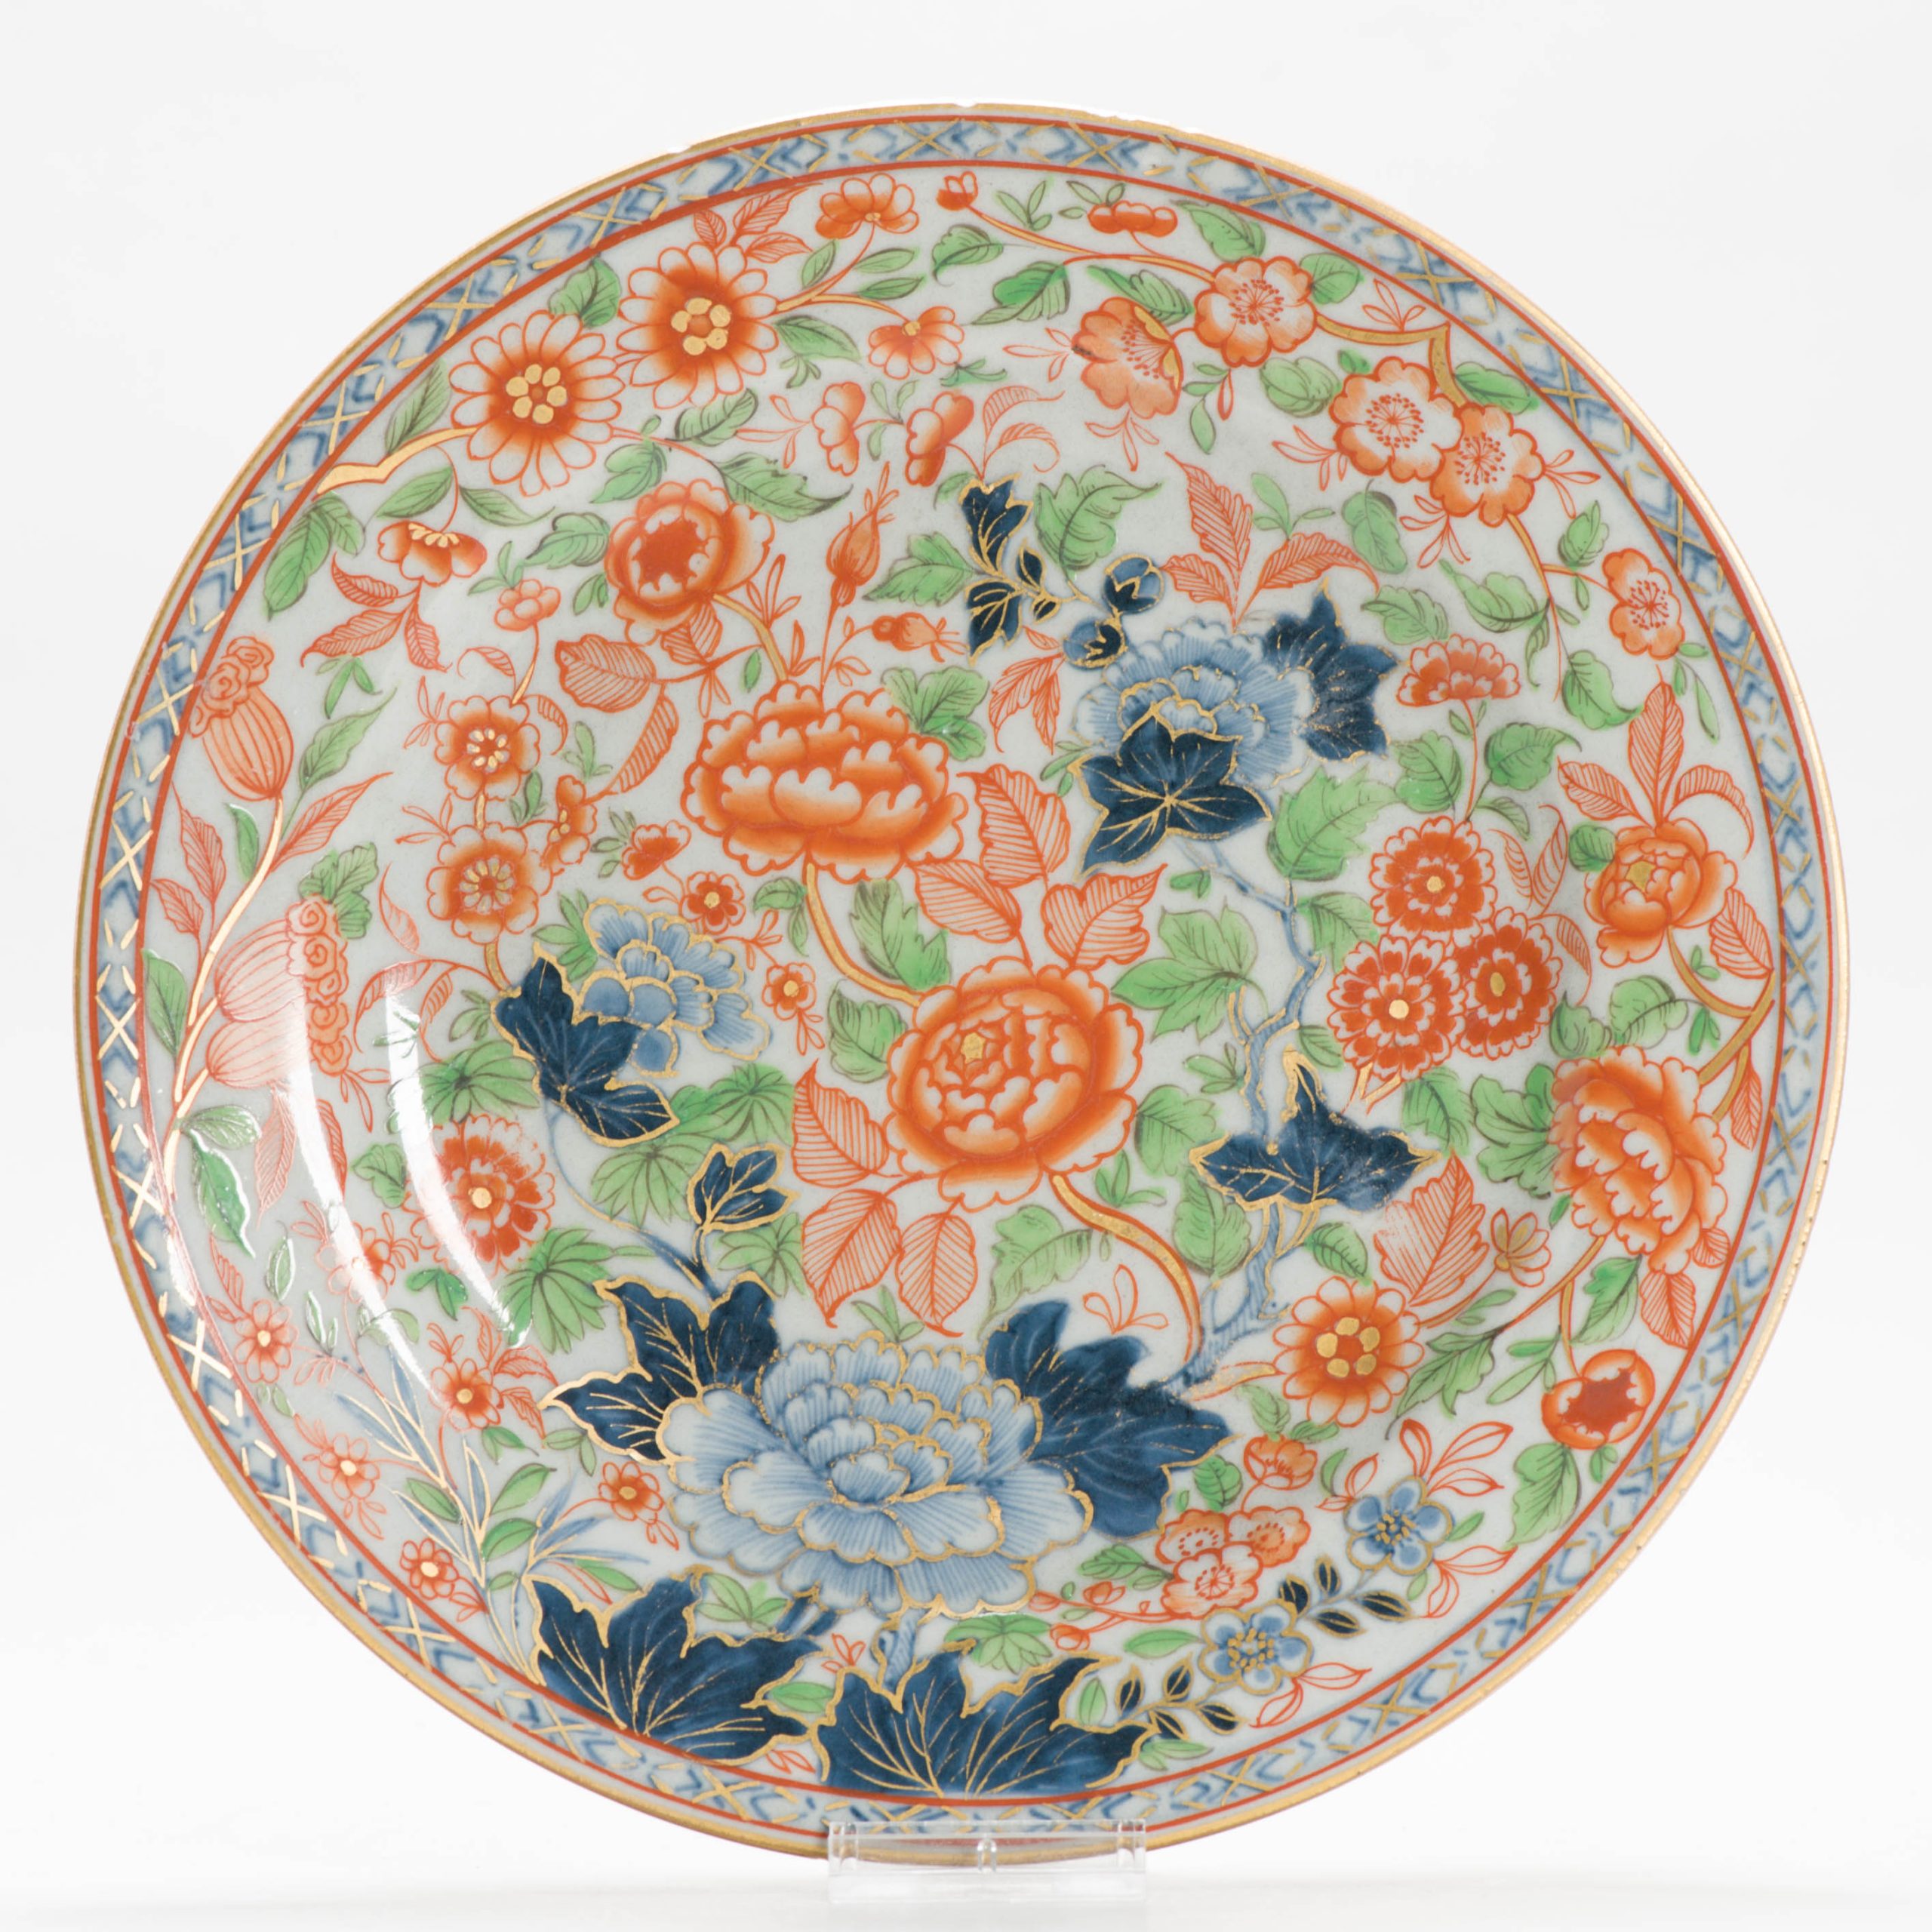 1302 Redecorated Qianlong Plate with overglaze European Decoration